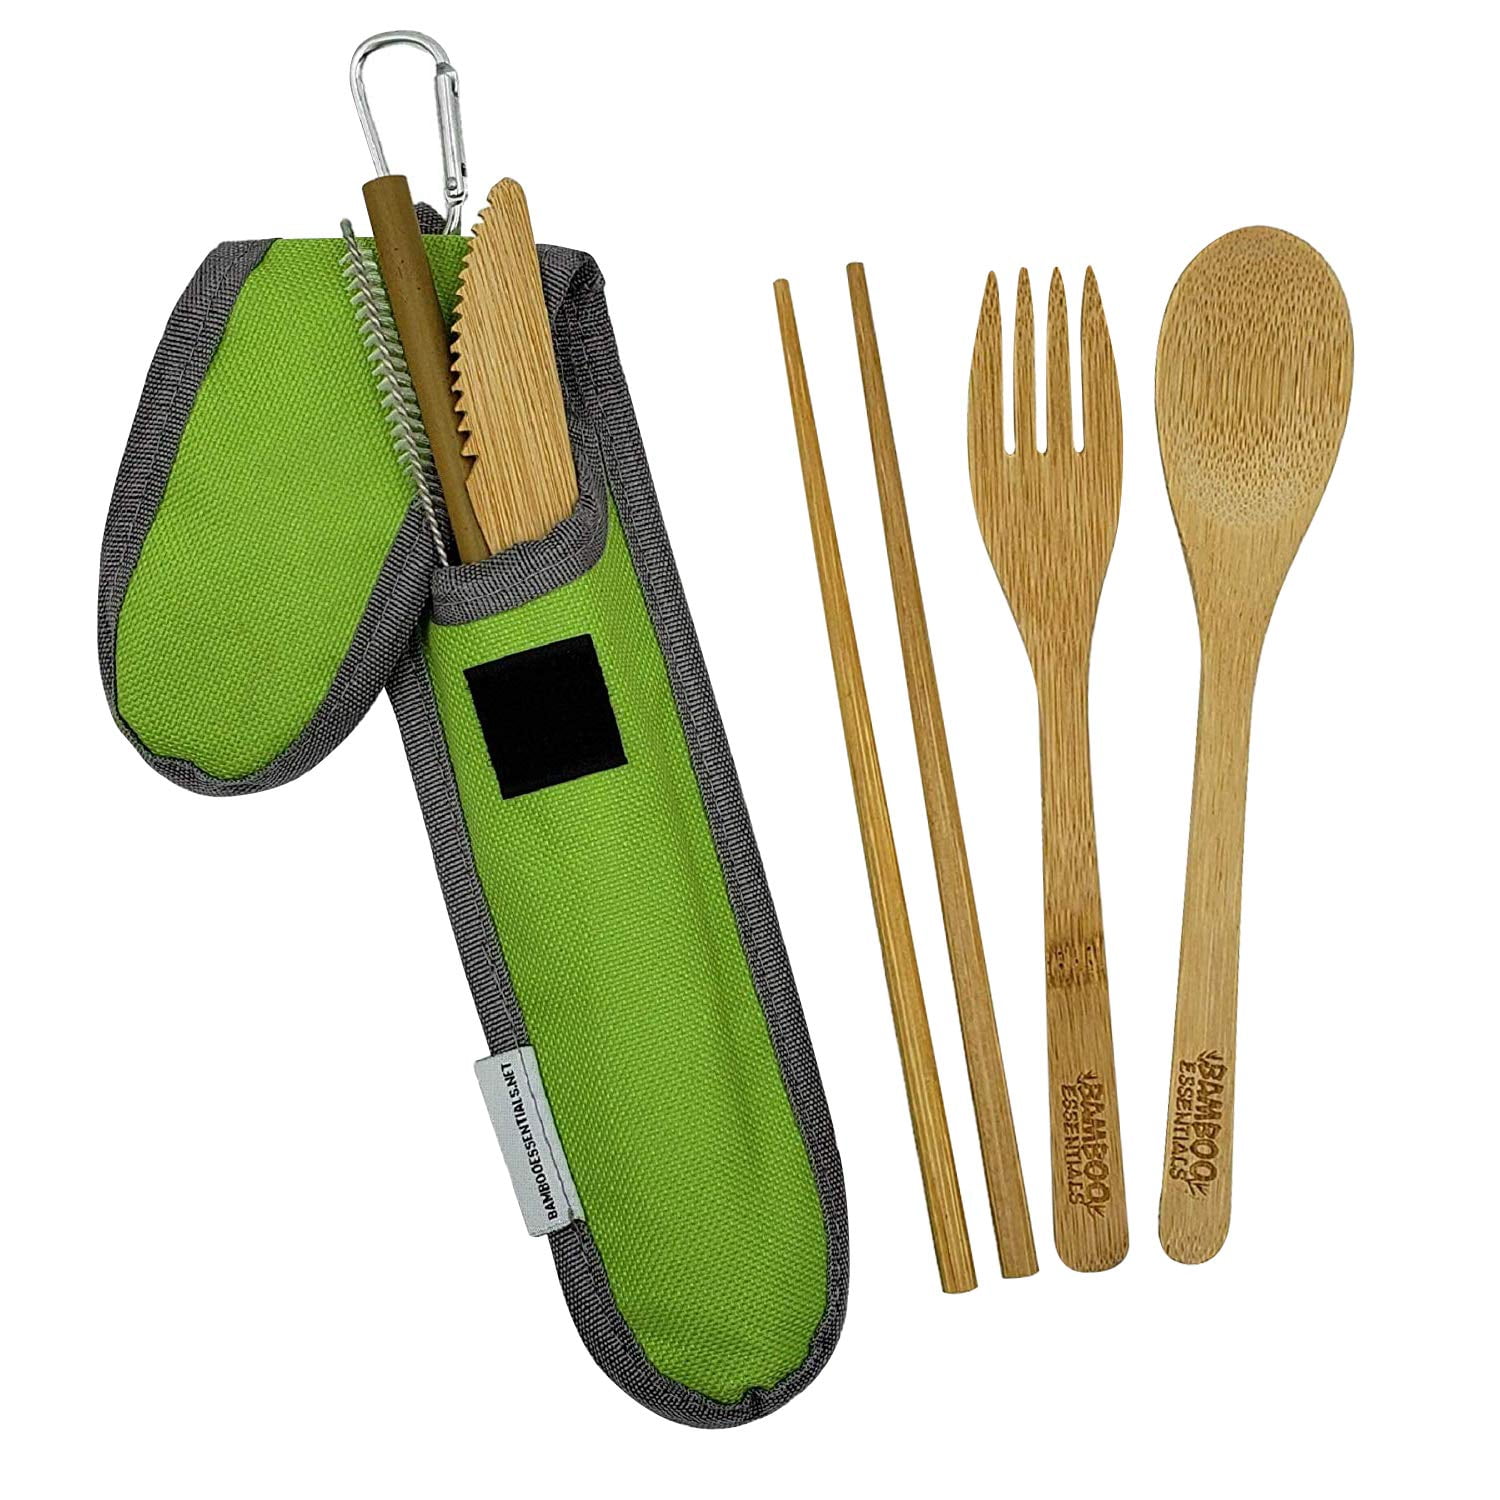 2pcs Stainless Steel Fork And Spoon Portable Tableware Set, Cute Green  Onion Spoon And Fork Set, Kitchen Utensils, Tableware